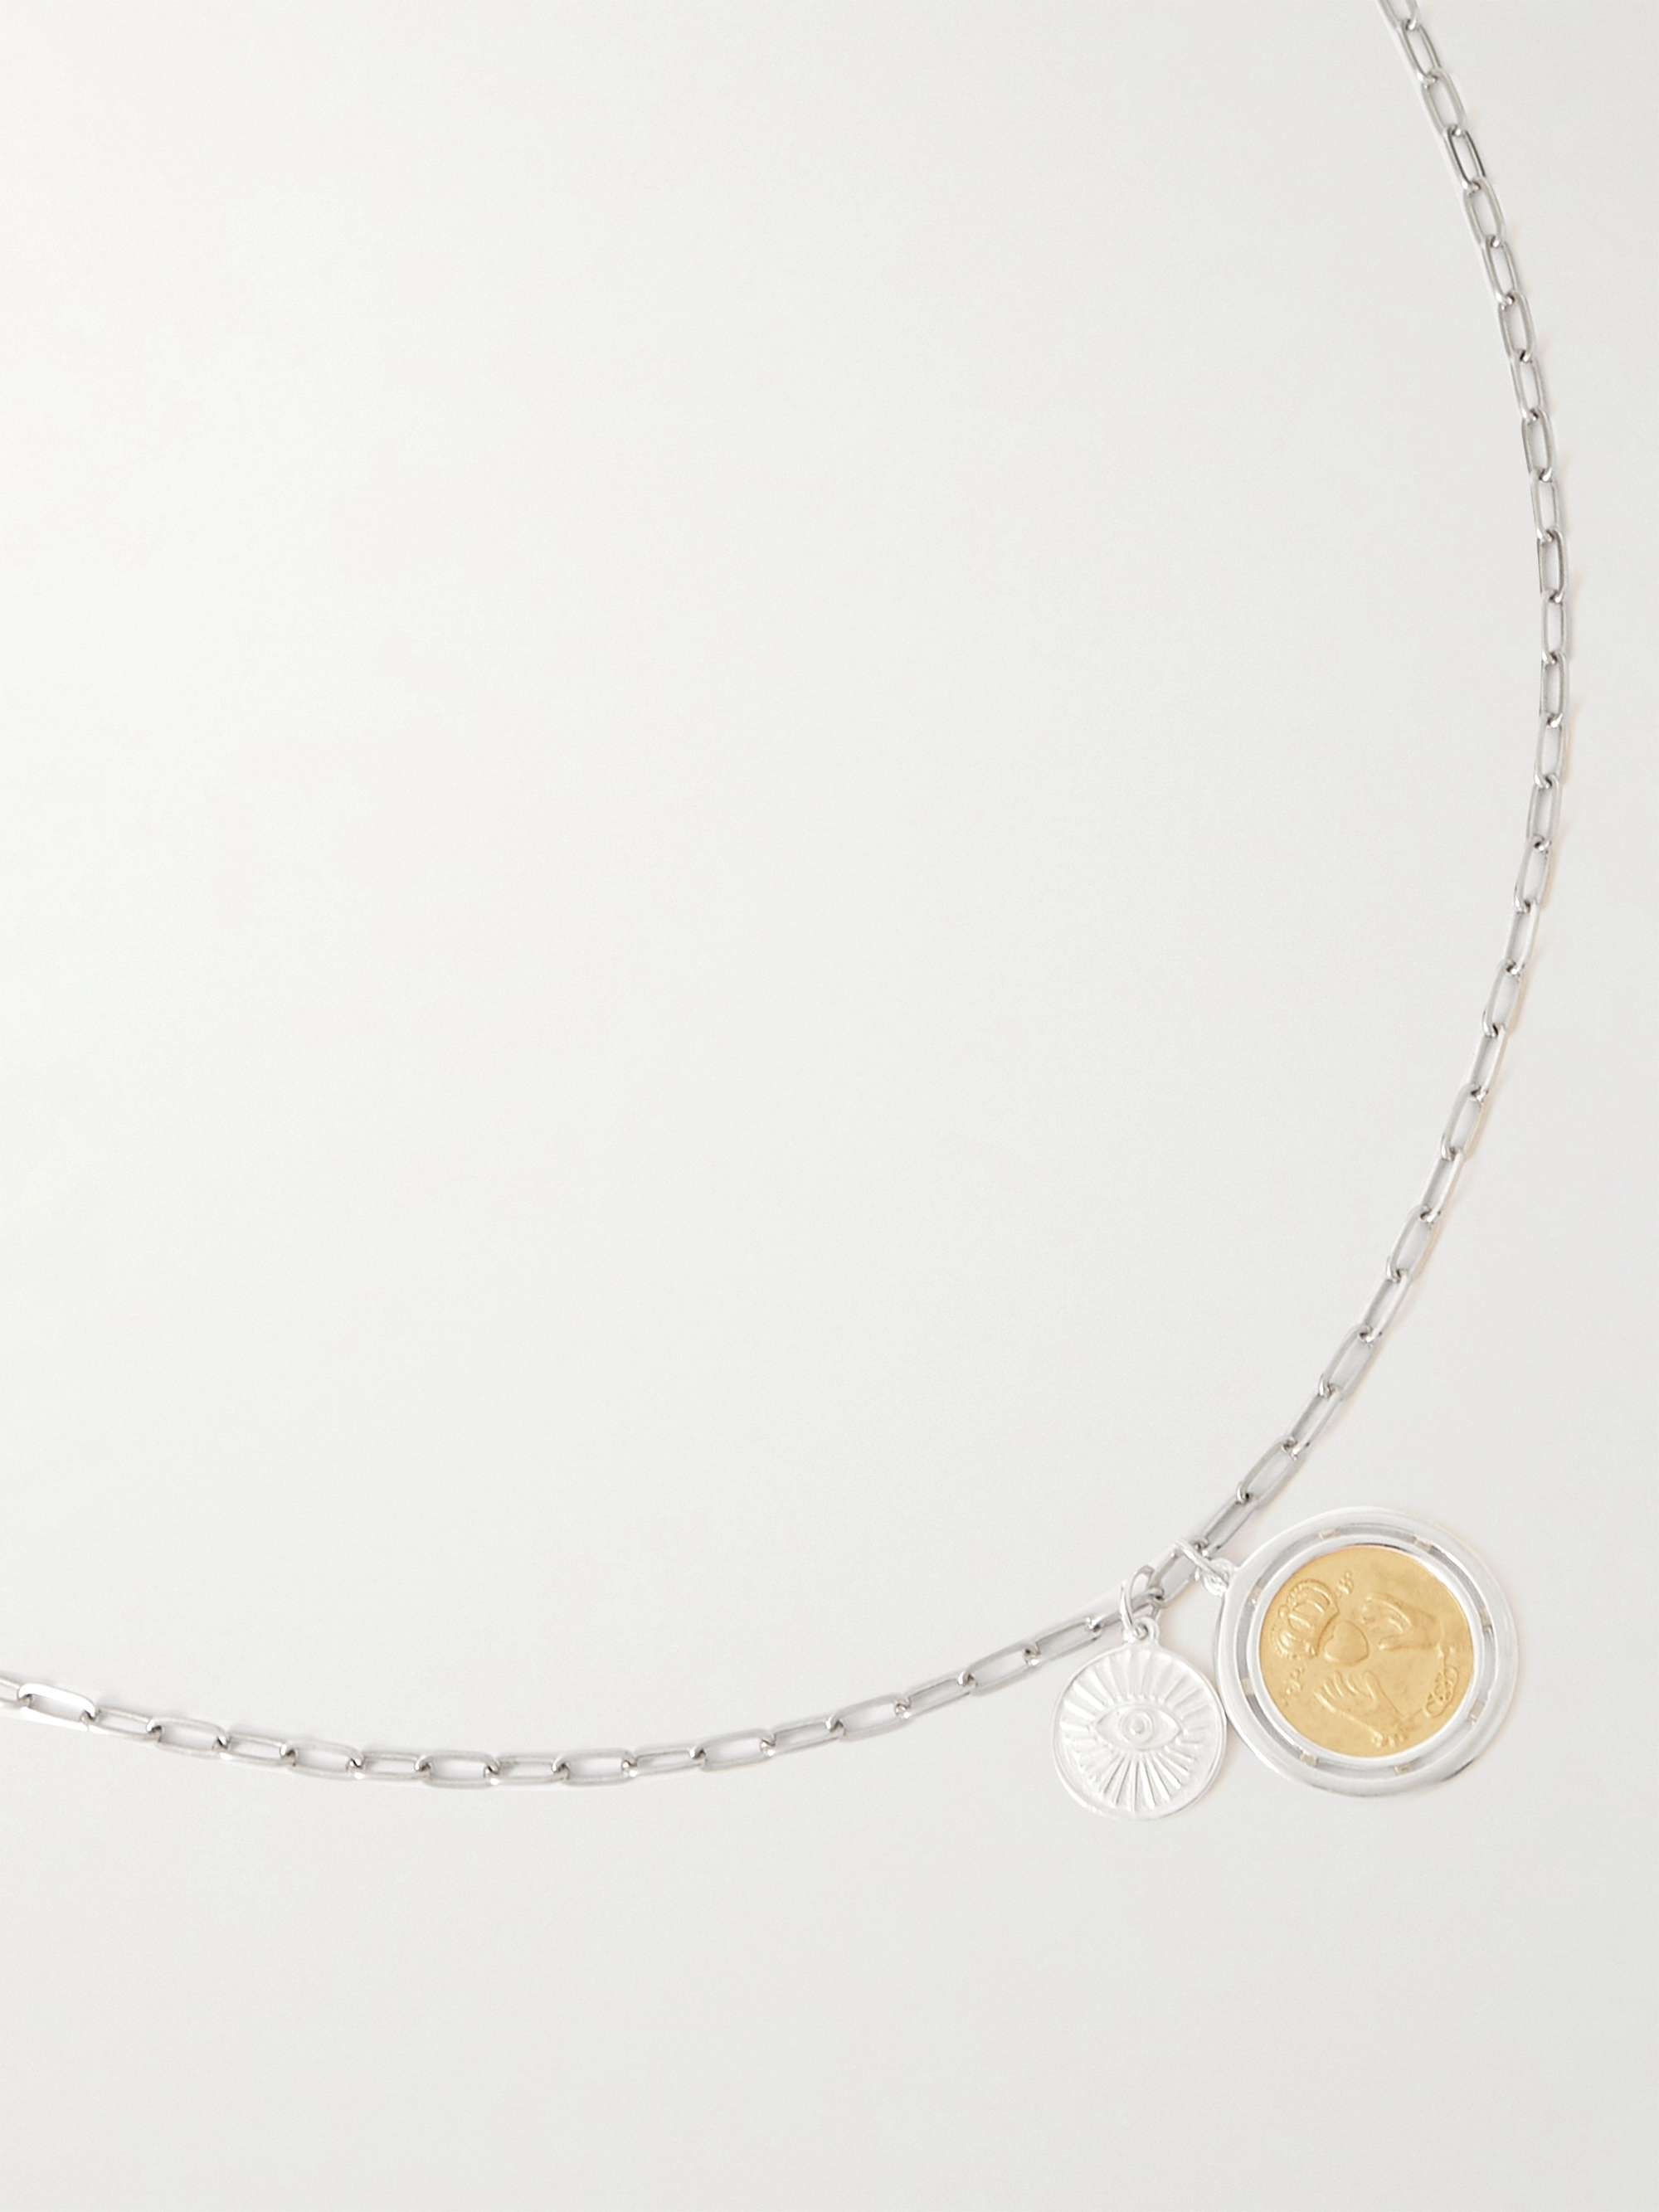 MIANSAI Sterling Silver and Gold Vermeil Necklace